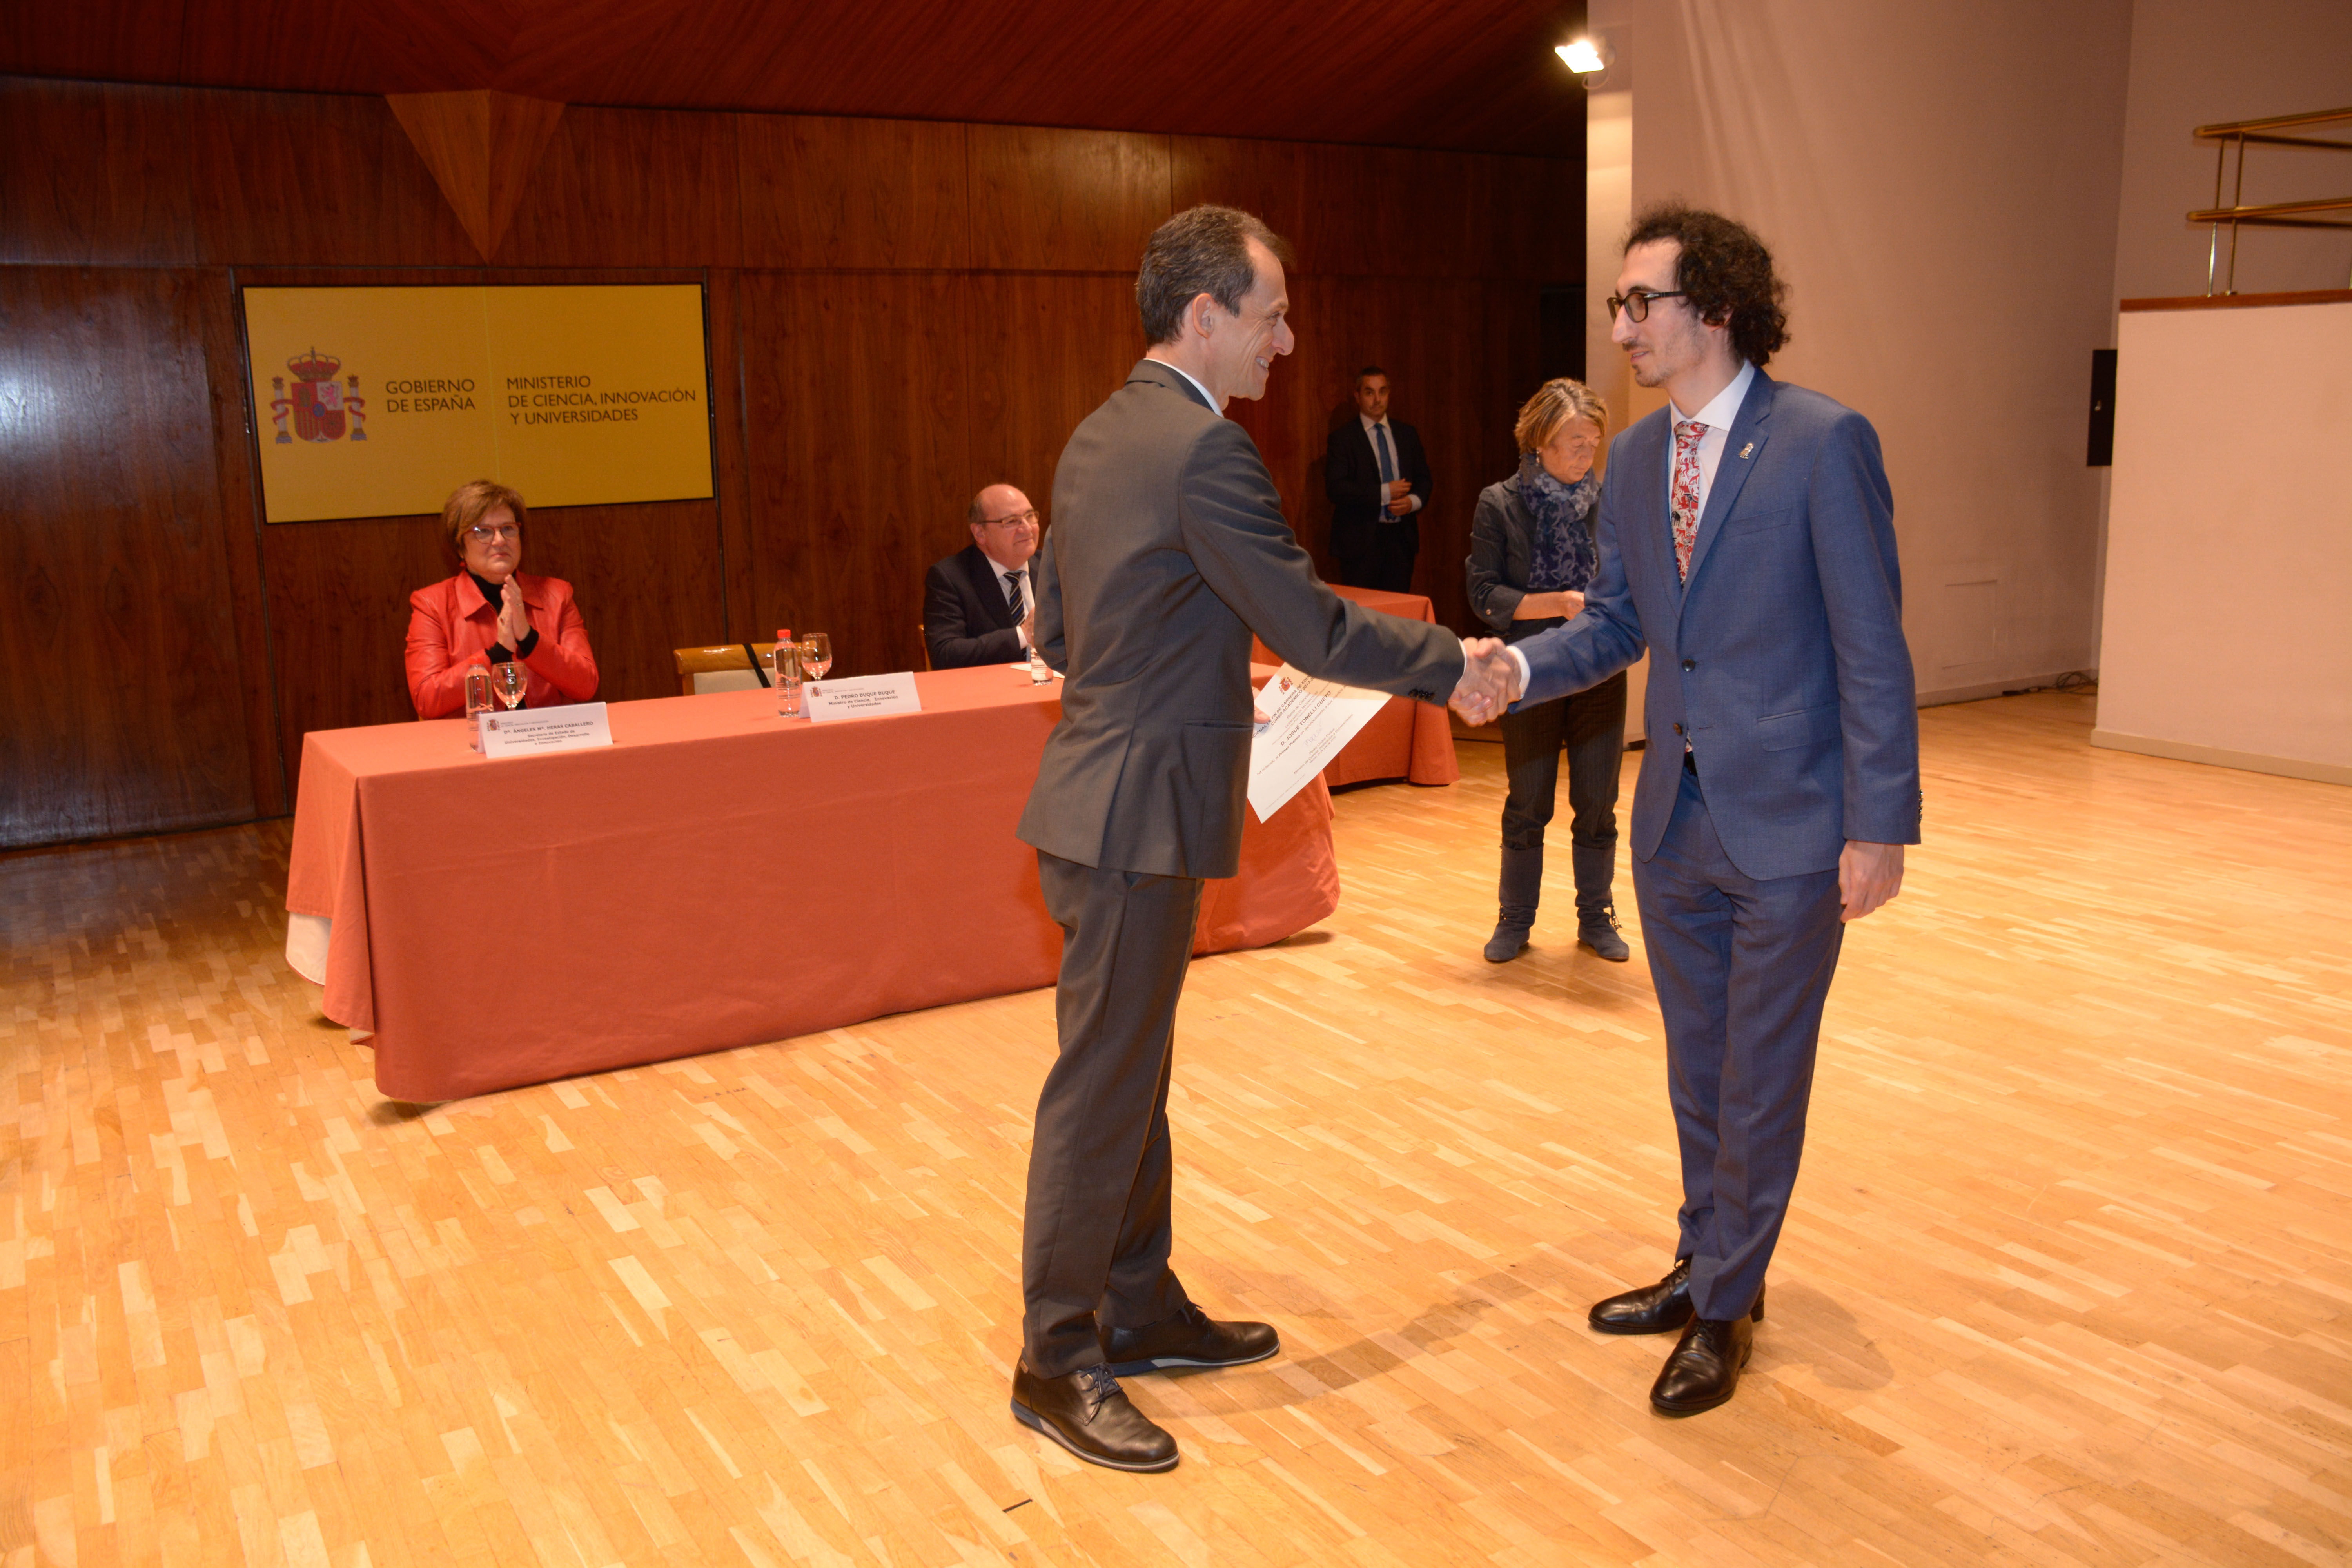 Josue Tonelli-Cueto receiving the Spanish National Prize End of Studies